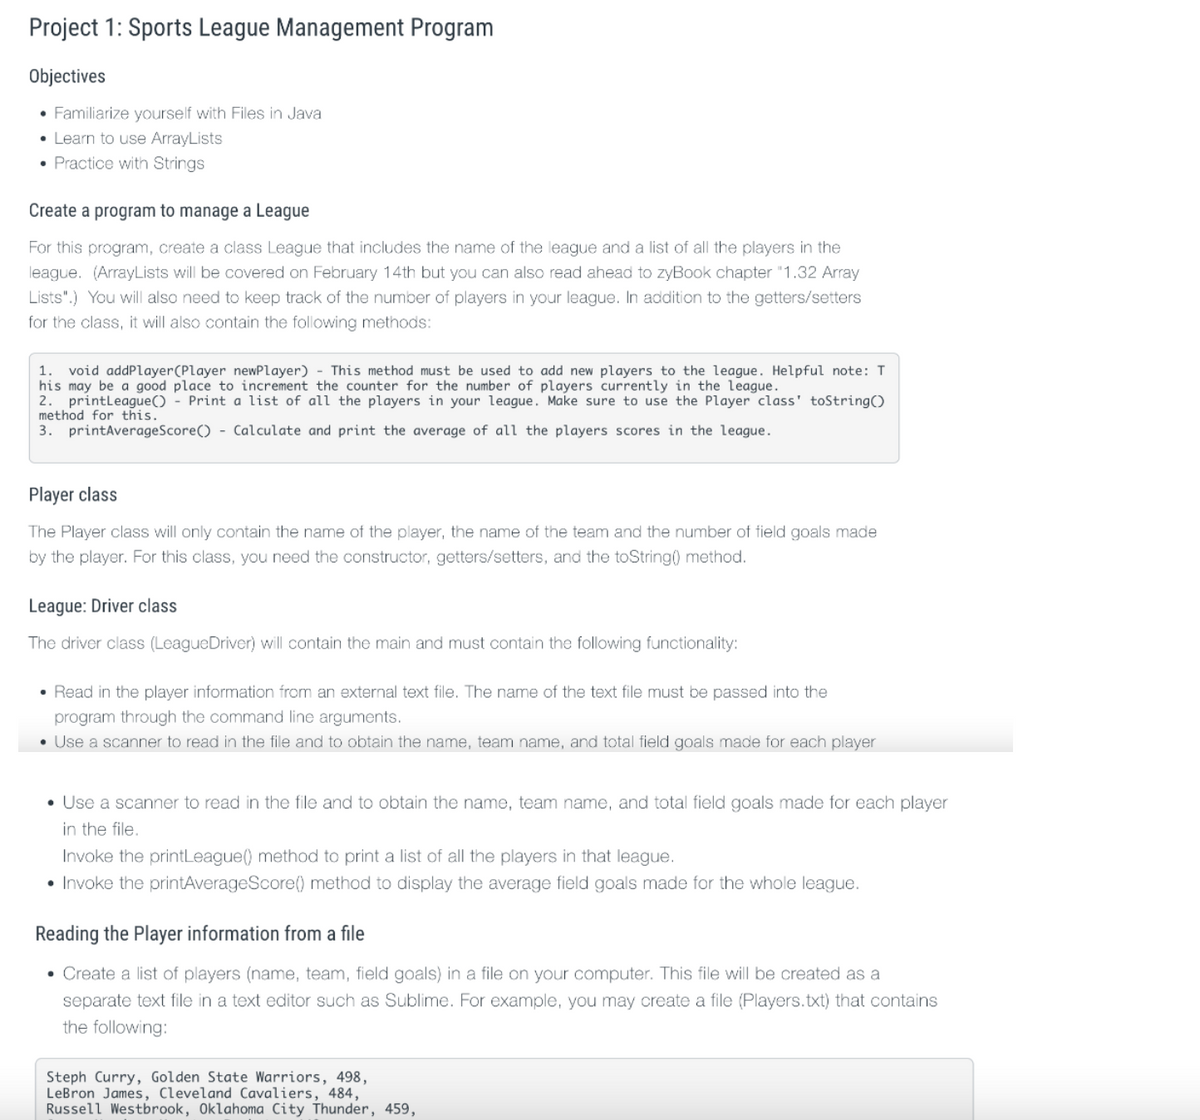 Project 1: Sports League Management Program
Objectives
• Familiarize yourself with Files in Java
• Learn to use ArrayLists
• Practice with Strings
Create a program to manage a League
For this program, create a class League that includes the name of the league and a list of all the players in the
league. (ArrayLists will be covered on February 14th but you can also read ahead to zyBook chapter "1.32 Array
Lists".) You will also need to keep track of the number of players in your league. In addition to the getters/setters
for the class, it will also contain the following methods:
1. void addPlayer(Player newPlayer) - This method must be used to add new players to the league. Helpful note: T
his may be a good place to increment the counter for the number of players currently in the league.
2. printleague() - Print a list of all the players in your league. Make sure to use the Player class' toString()
method for this.
3. printAverageScore() - Calculate and print the average of all the players scores in the league.
Player class
The Player class will only contain the name of the player, the name of the team and the number of field goals made
by the player. For this class, you need the constructor, getters/setters, and the toString() method.
League: Driver class
The driver class (LeagueDriver) will contain the main and must contain the following functionality:
• Read in the player information from an external text file. The name of the text file must be passed into the
program through the command line arguments.
• Use a scanner to read in the file and to obtain the name, team name, and total field goals made for each player
• Use a scanner to read in the file and to obtain the name, team name, and total field goals made for each player
in the file.
Invoke the printLeague() method to print a list of all the players in that league.
• Invoke the printAverageScore() method to display the average field goals made for the whole league.
Reading the Player information from a file
• Create a list of players (name, team, field goals) in a file on your computer. This file will be created as a
separate text file in a text editor such as Sublime. For example, you may create a file (Players.txt) that contains
the following:
Steph Curry, Golden State Warriors, 498,
LeBron James, Cleveland Cavaliers, 484,
Russell Westbrook, Oklahoma City Thunder, 459,
